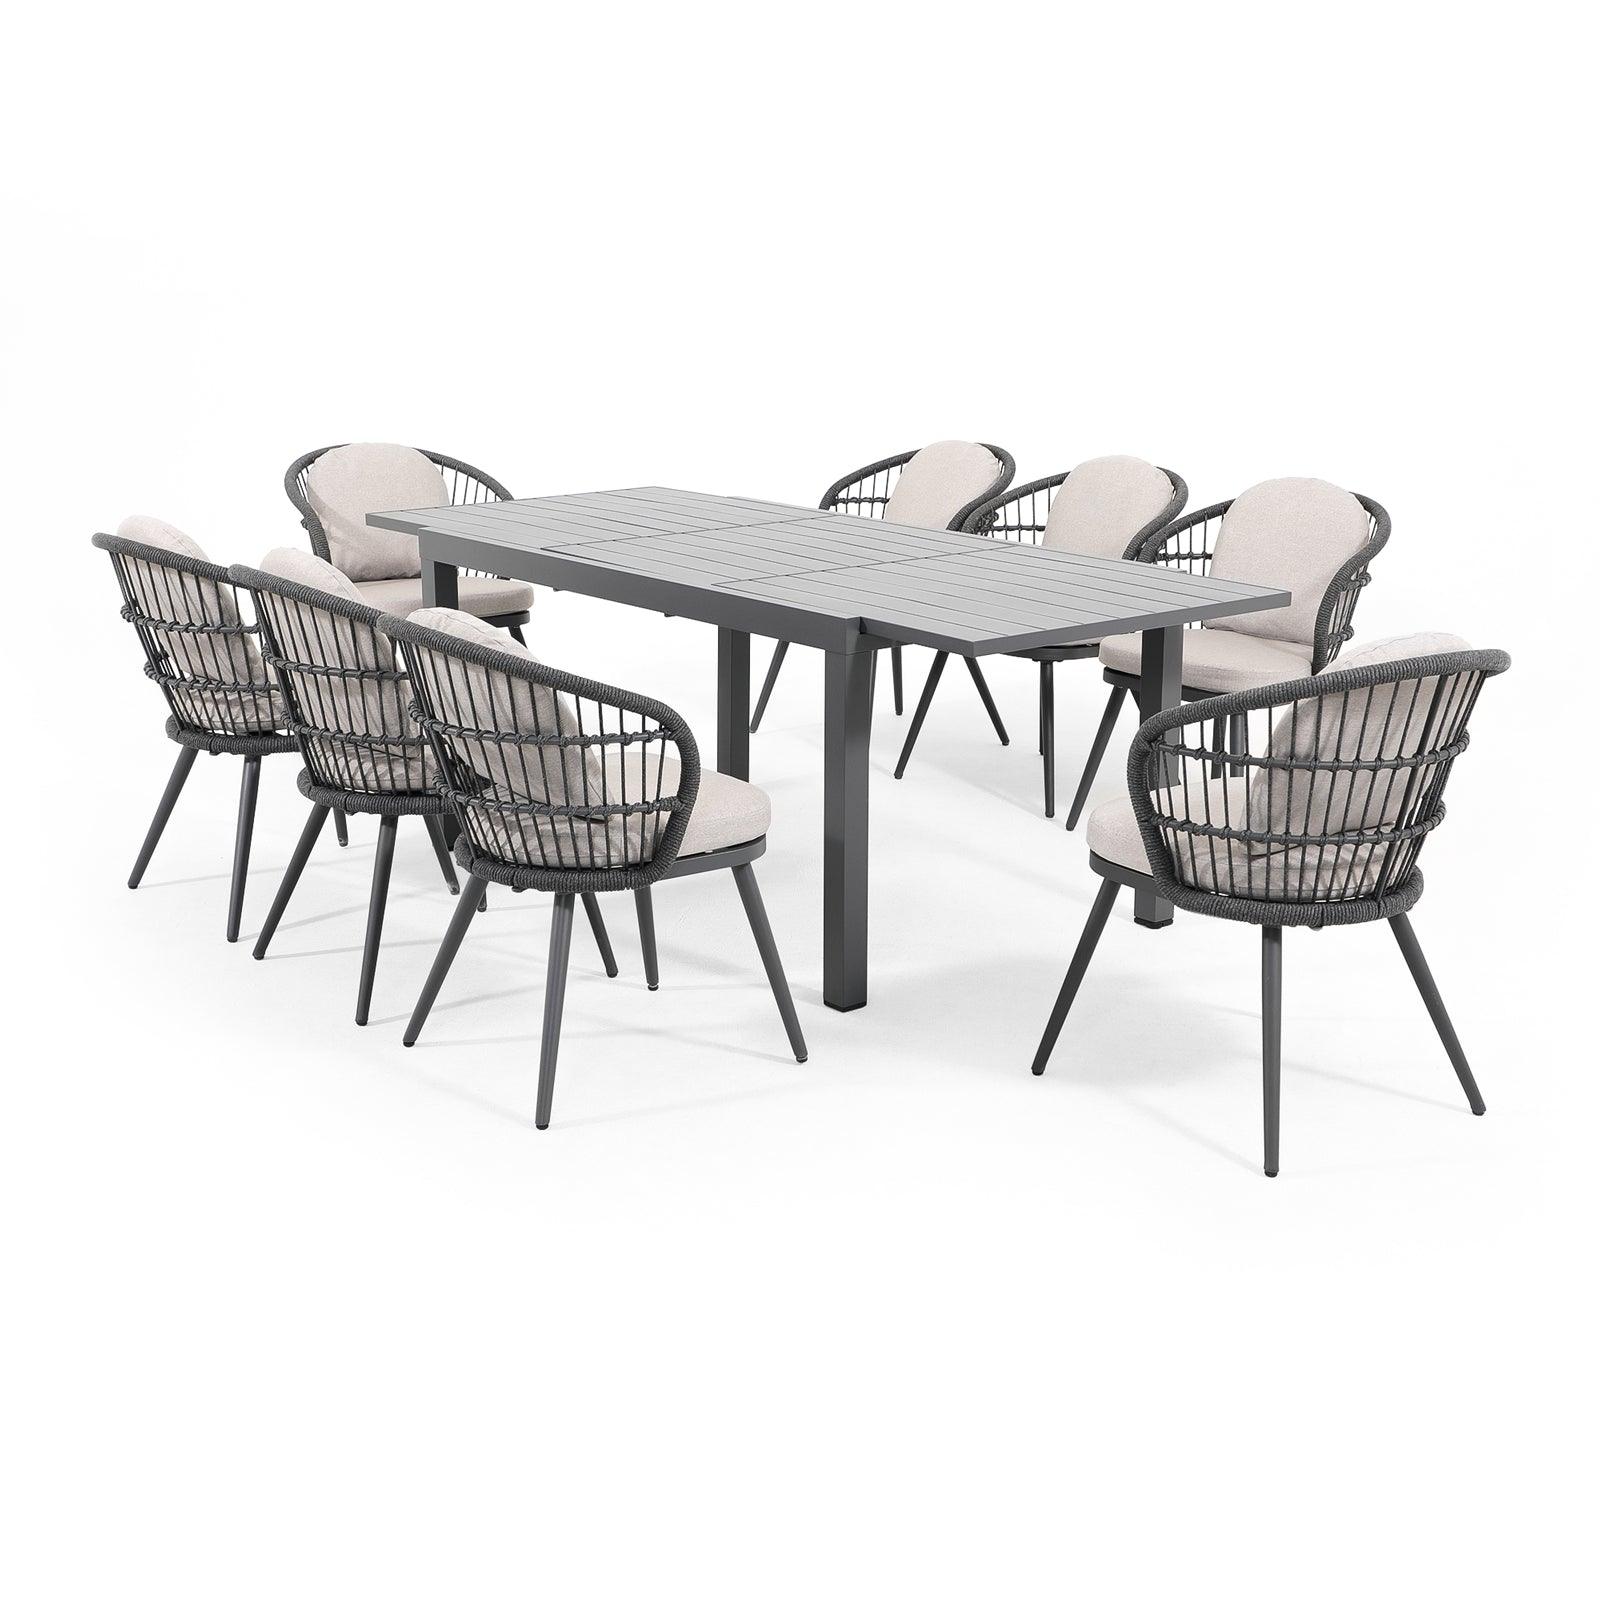 Comino Modern Rope Outdoor Furniture,  dark grey aluminum frame outdoor Dining Set for 8 with light grey cushions, 8 dining seats with backrest rope design, 1 extendable rectangle aluminum dining table - Jardina Furniture#Pieces_9-pc.